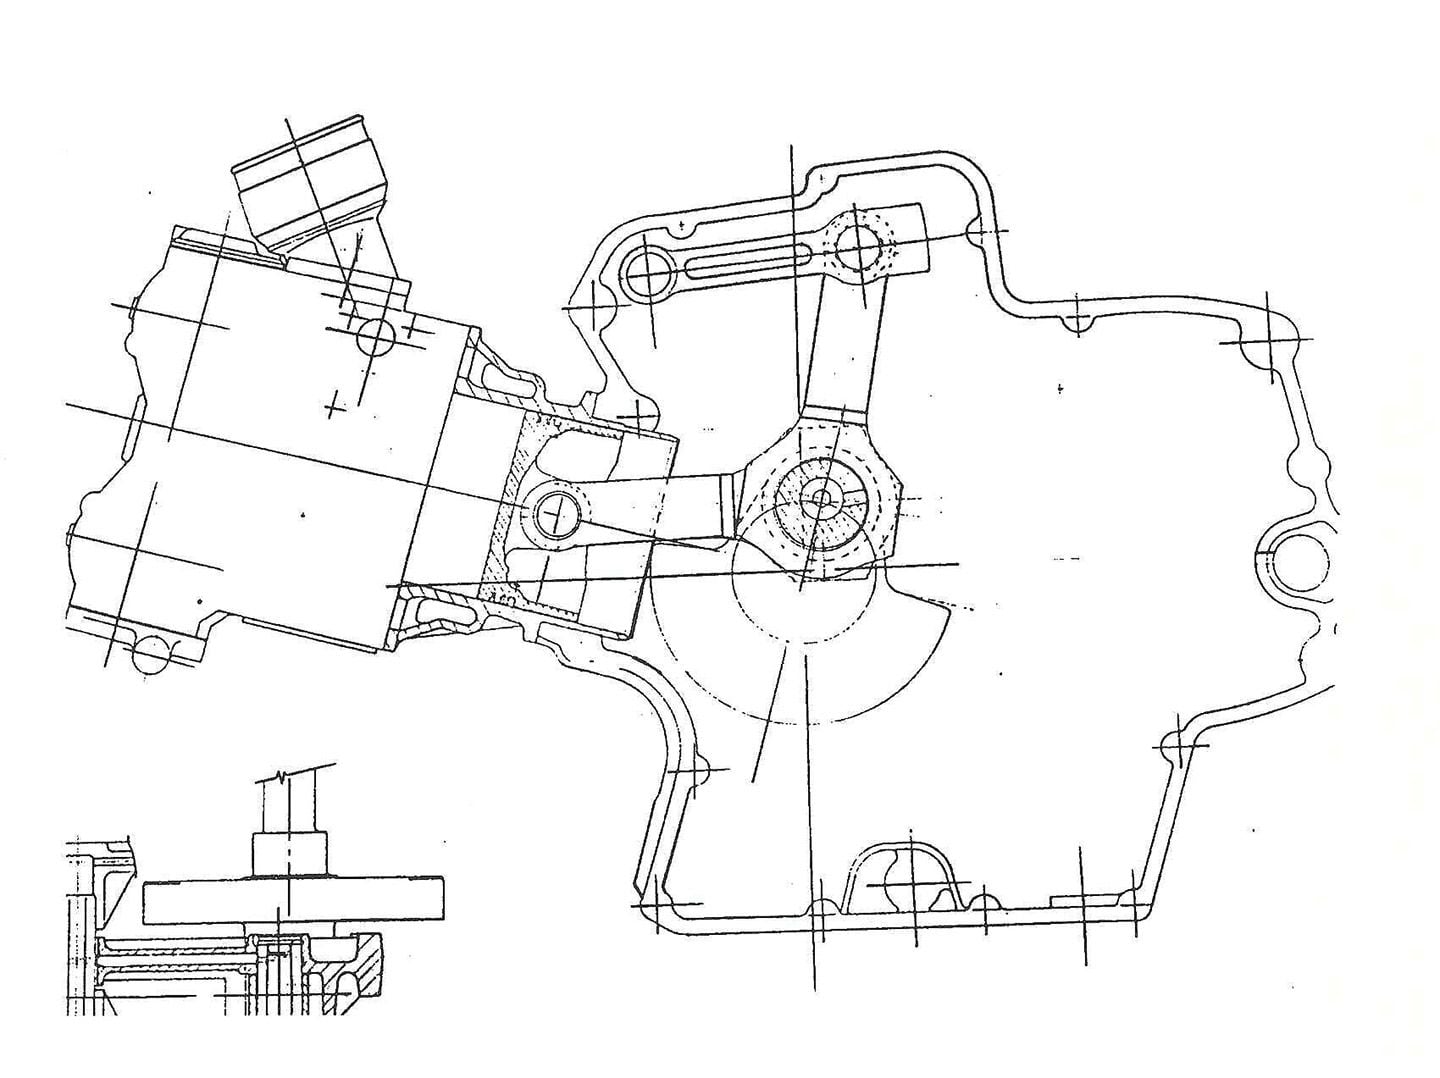 This is a direct scan of the fax Ducati sent to <i>Cycle World</i> for the 1993 Kevin Cameron tech story on the Supermono single—right out of the archive. The horizontal cylinder remains but the vertical cylinder was removed. The vertical cylinder connecting rod operated a reciprocating weight that made this single as smooth and balanced as a twin.